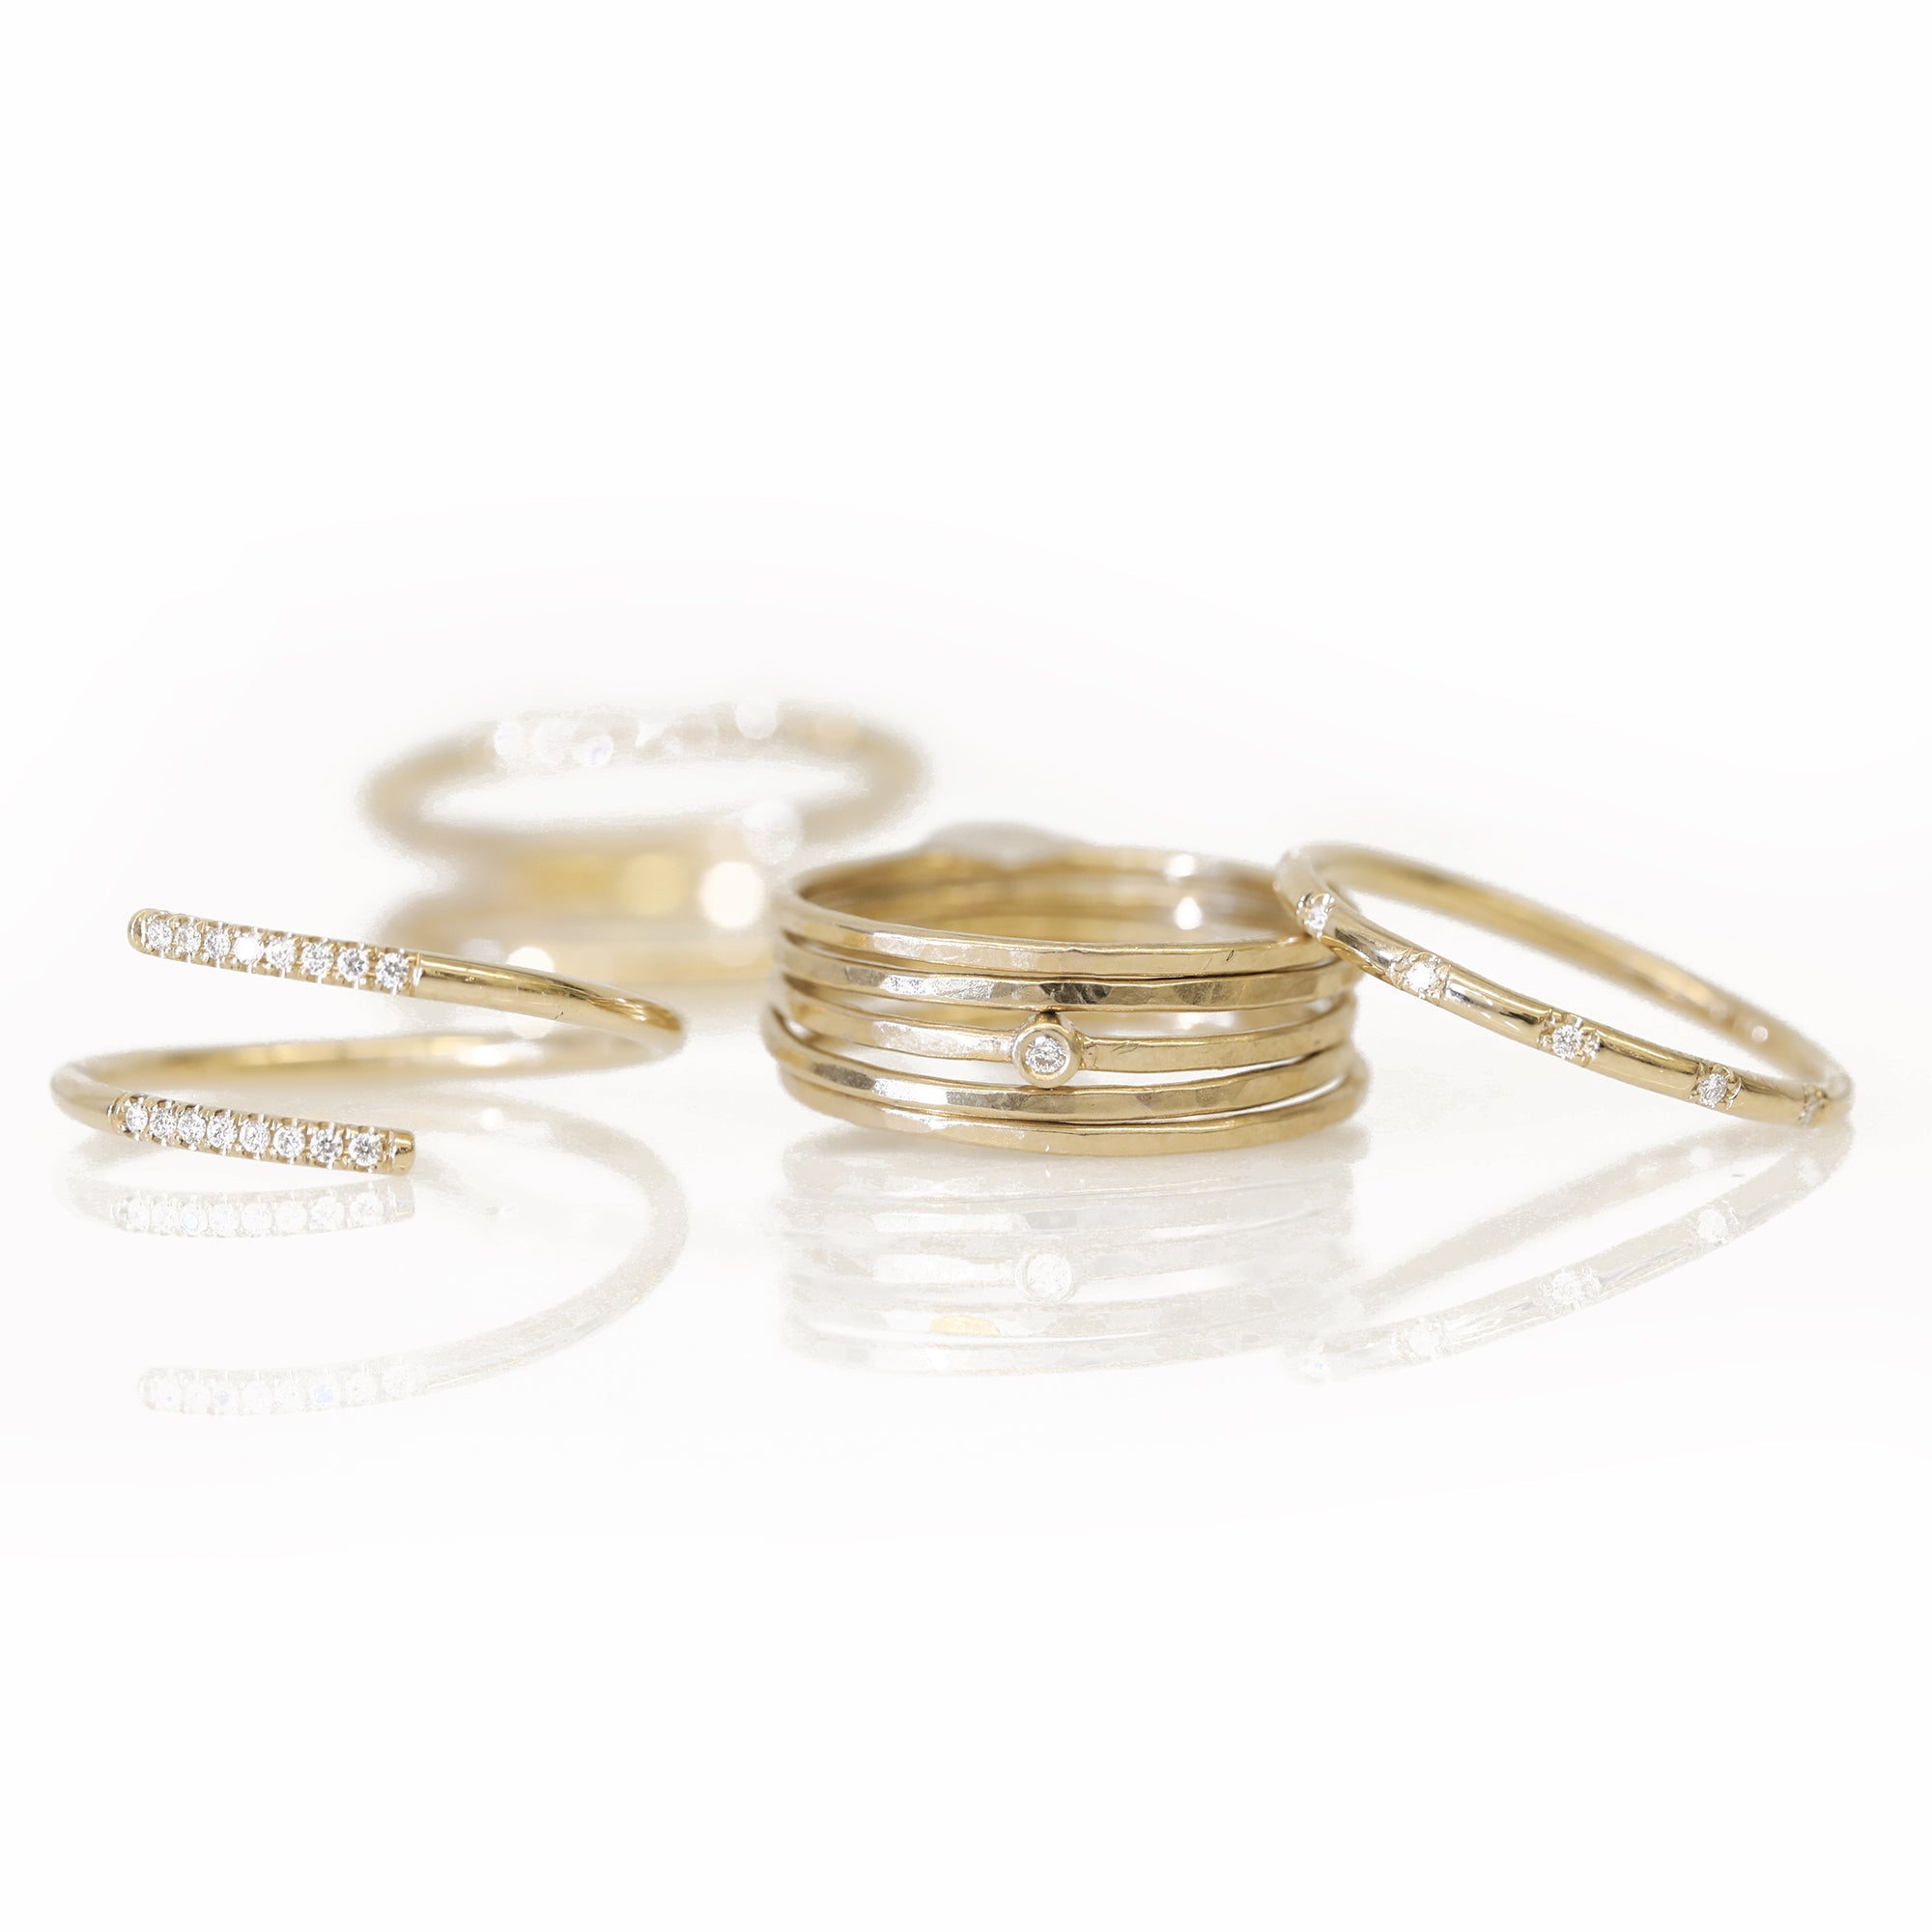 Zoe Chicco Five Gold Thin Hammered Stacking Rings with Single Diamond